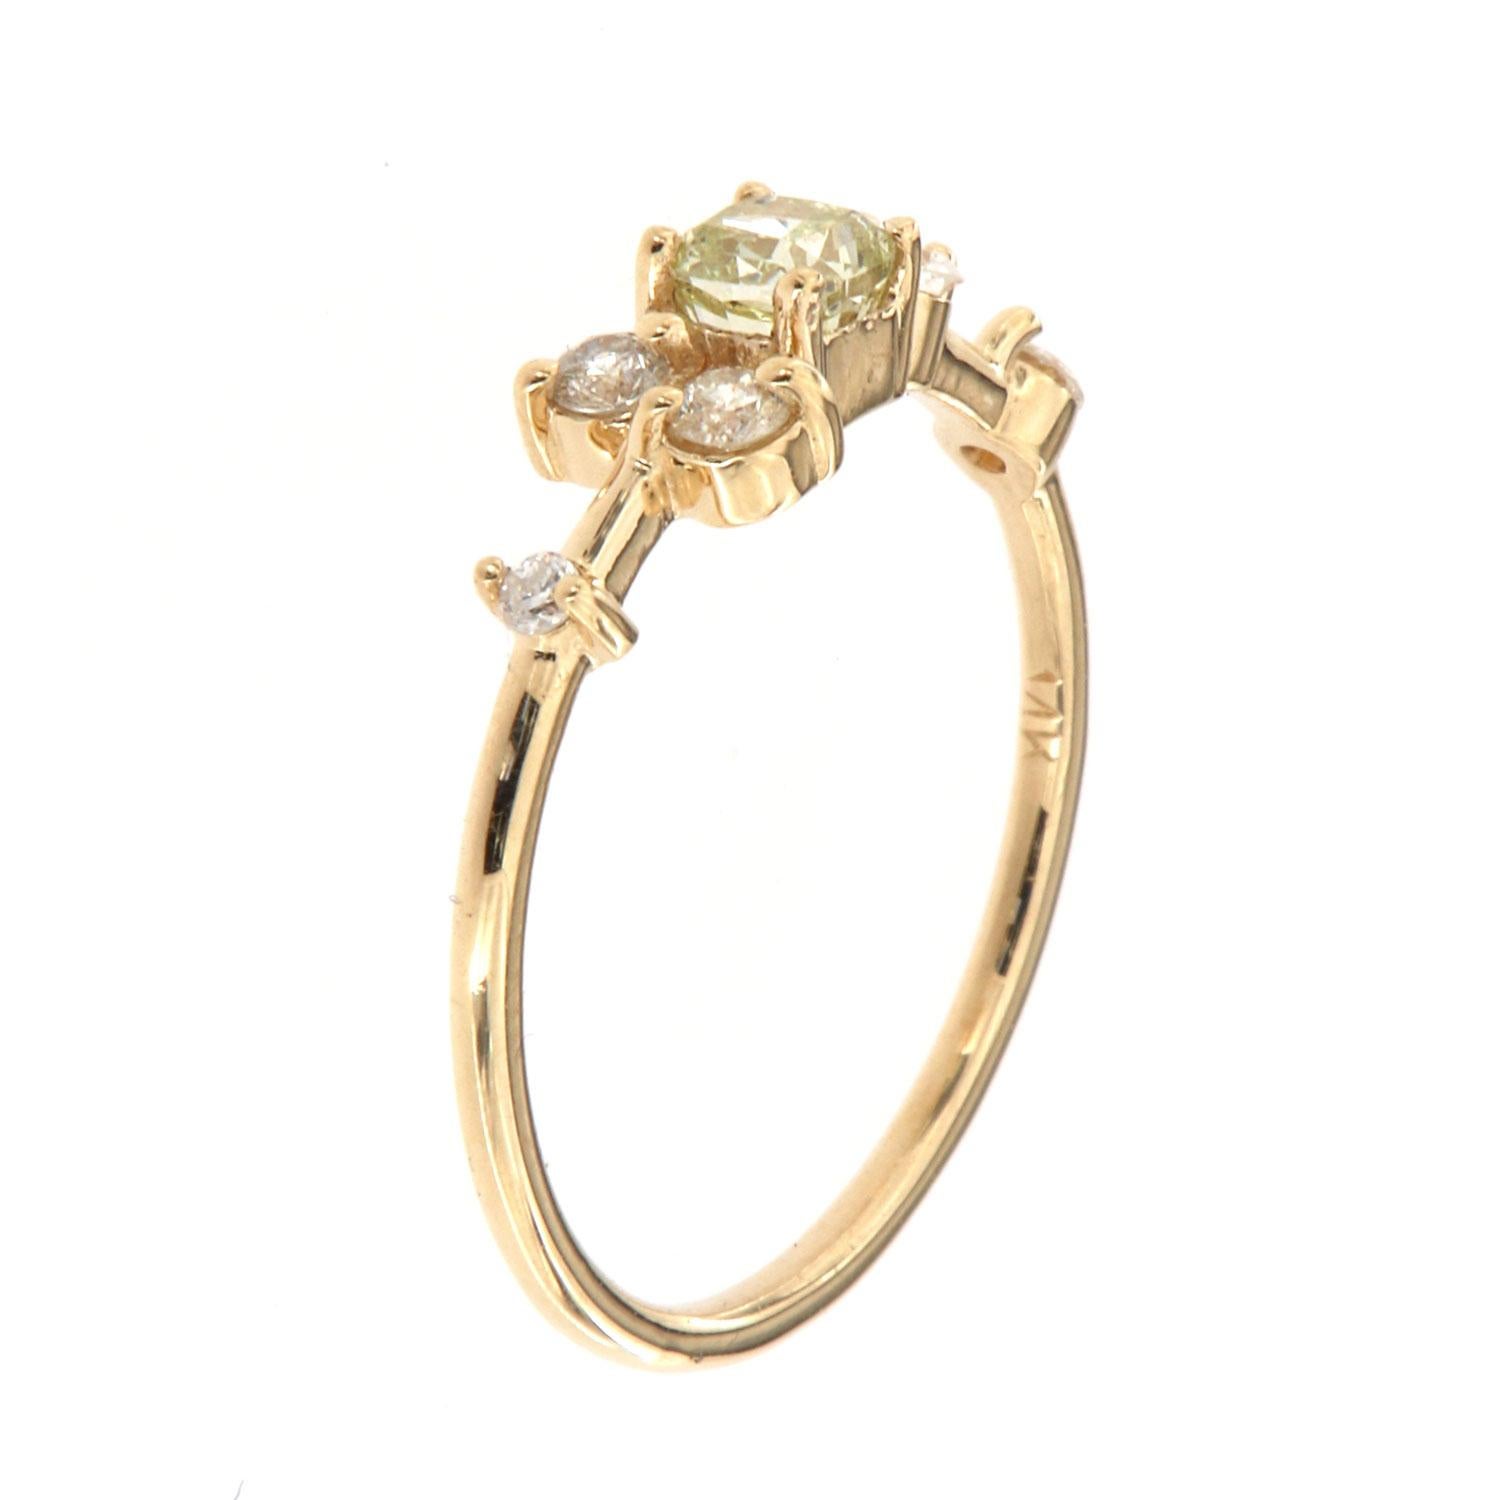 This 14K yellow gold petite ring features five (5) round brilliant diamonds scattered on a delicate 1.2 mm band. A perfectly square GIA-certified 0.31 Carat Cushion shape Yellow diamond is placed in the center of this organically designed ring